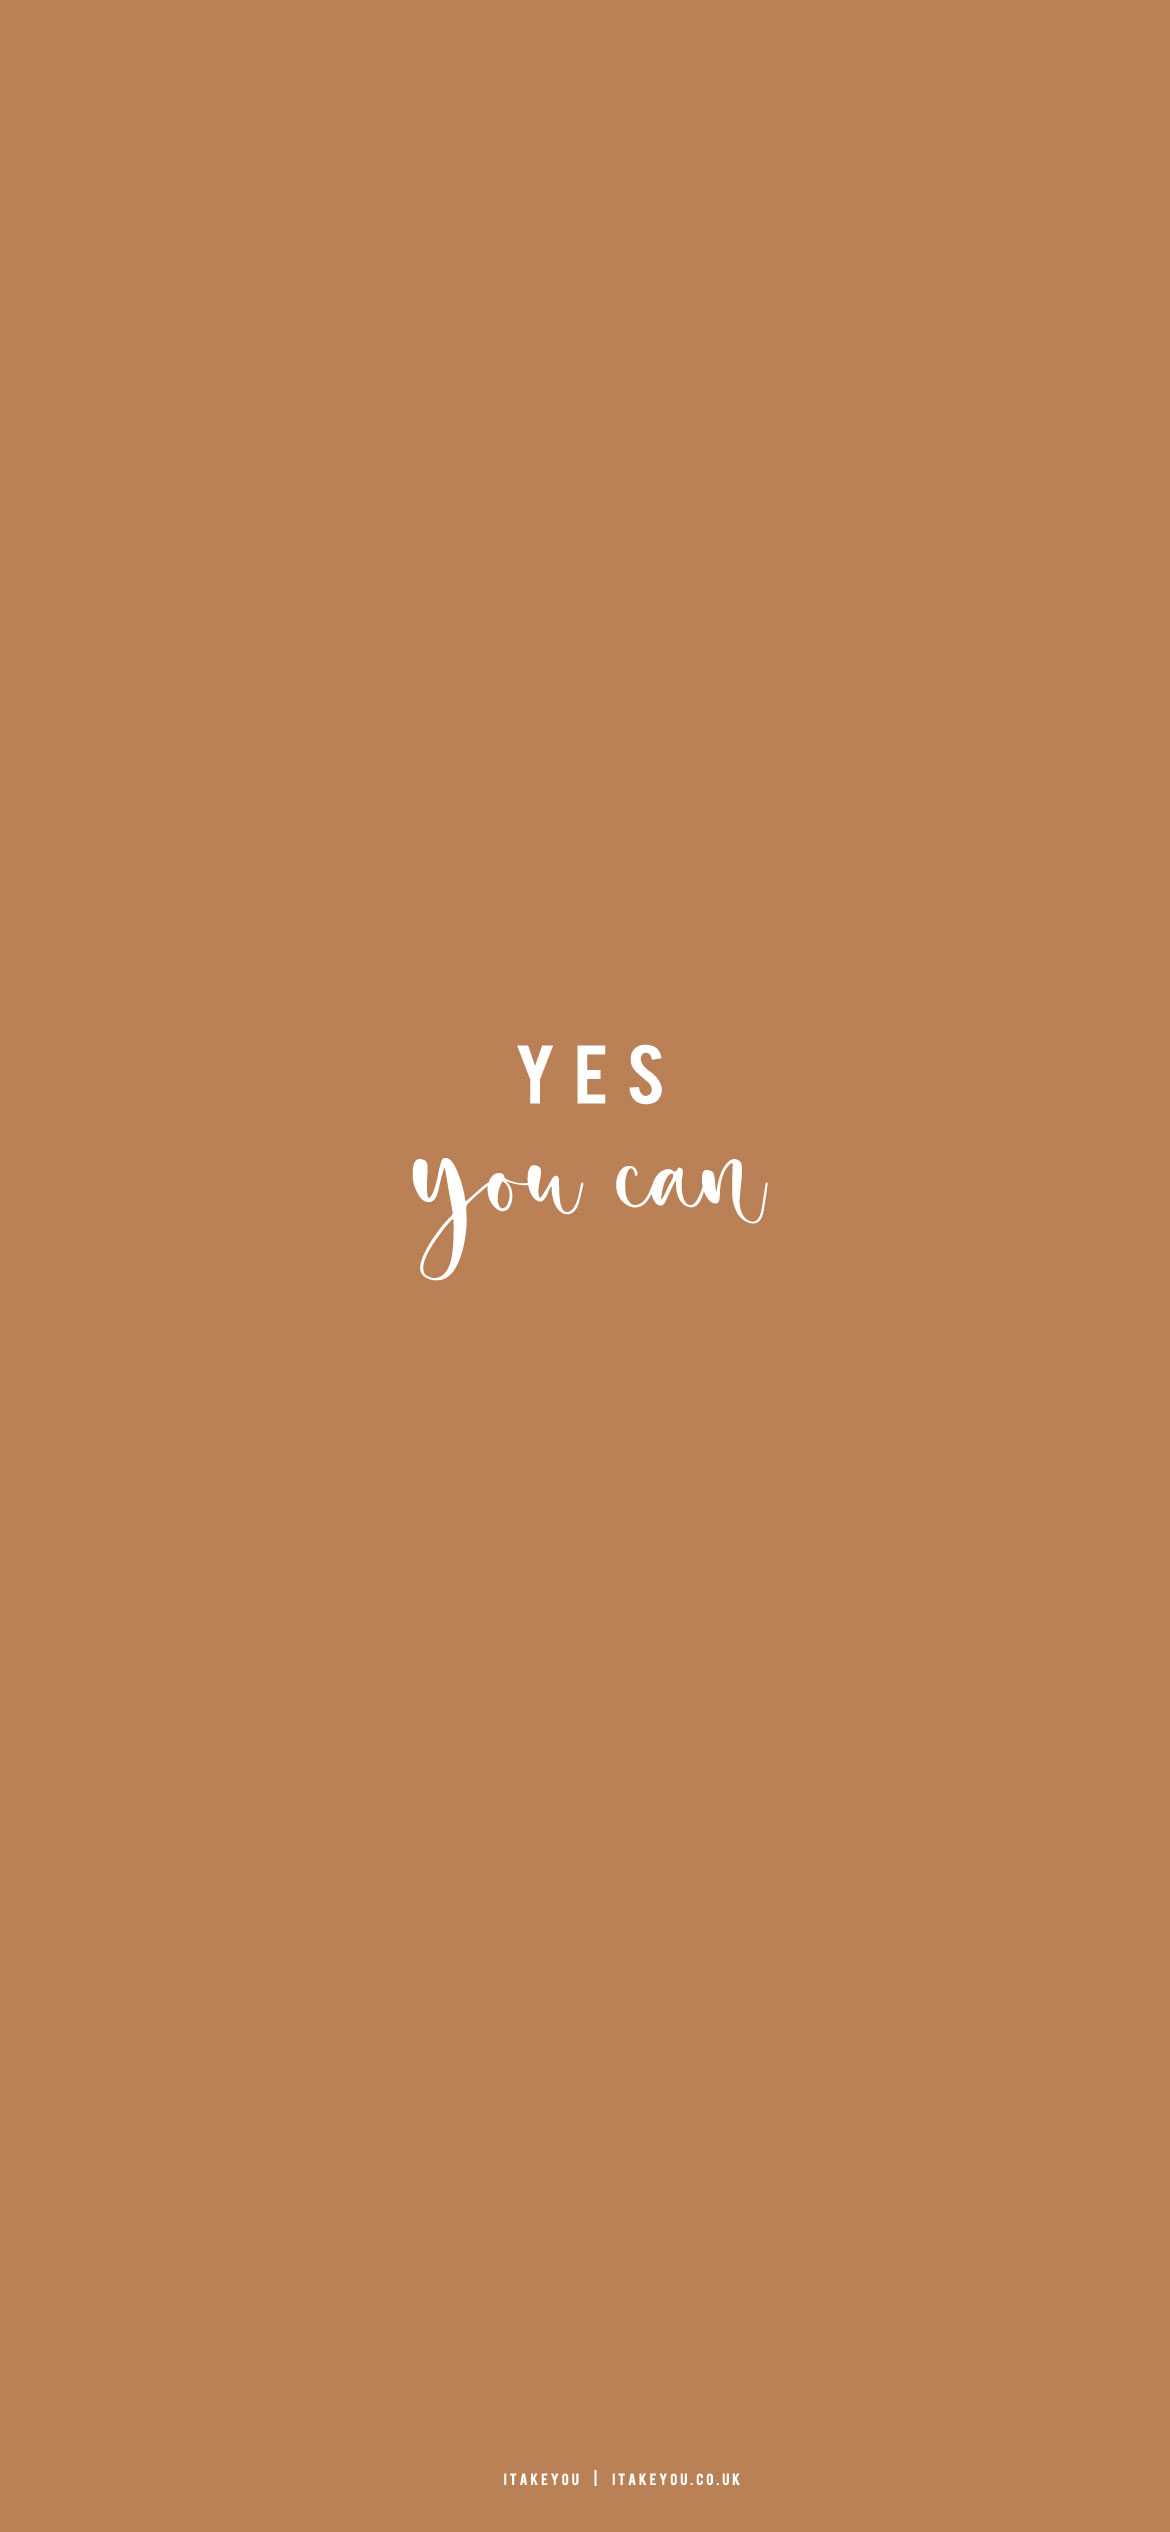 Yes you can motivational phone wallpaper - Smile